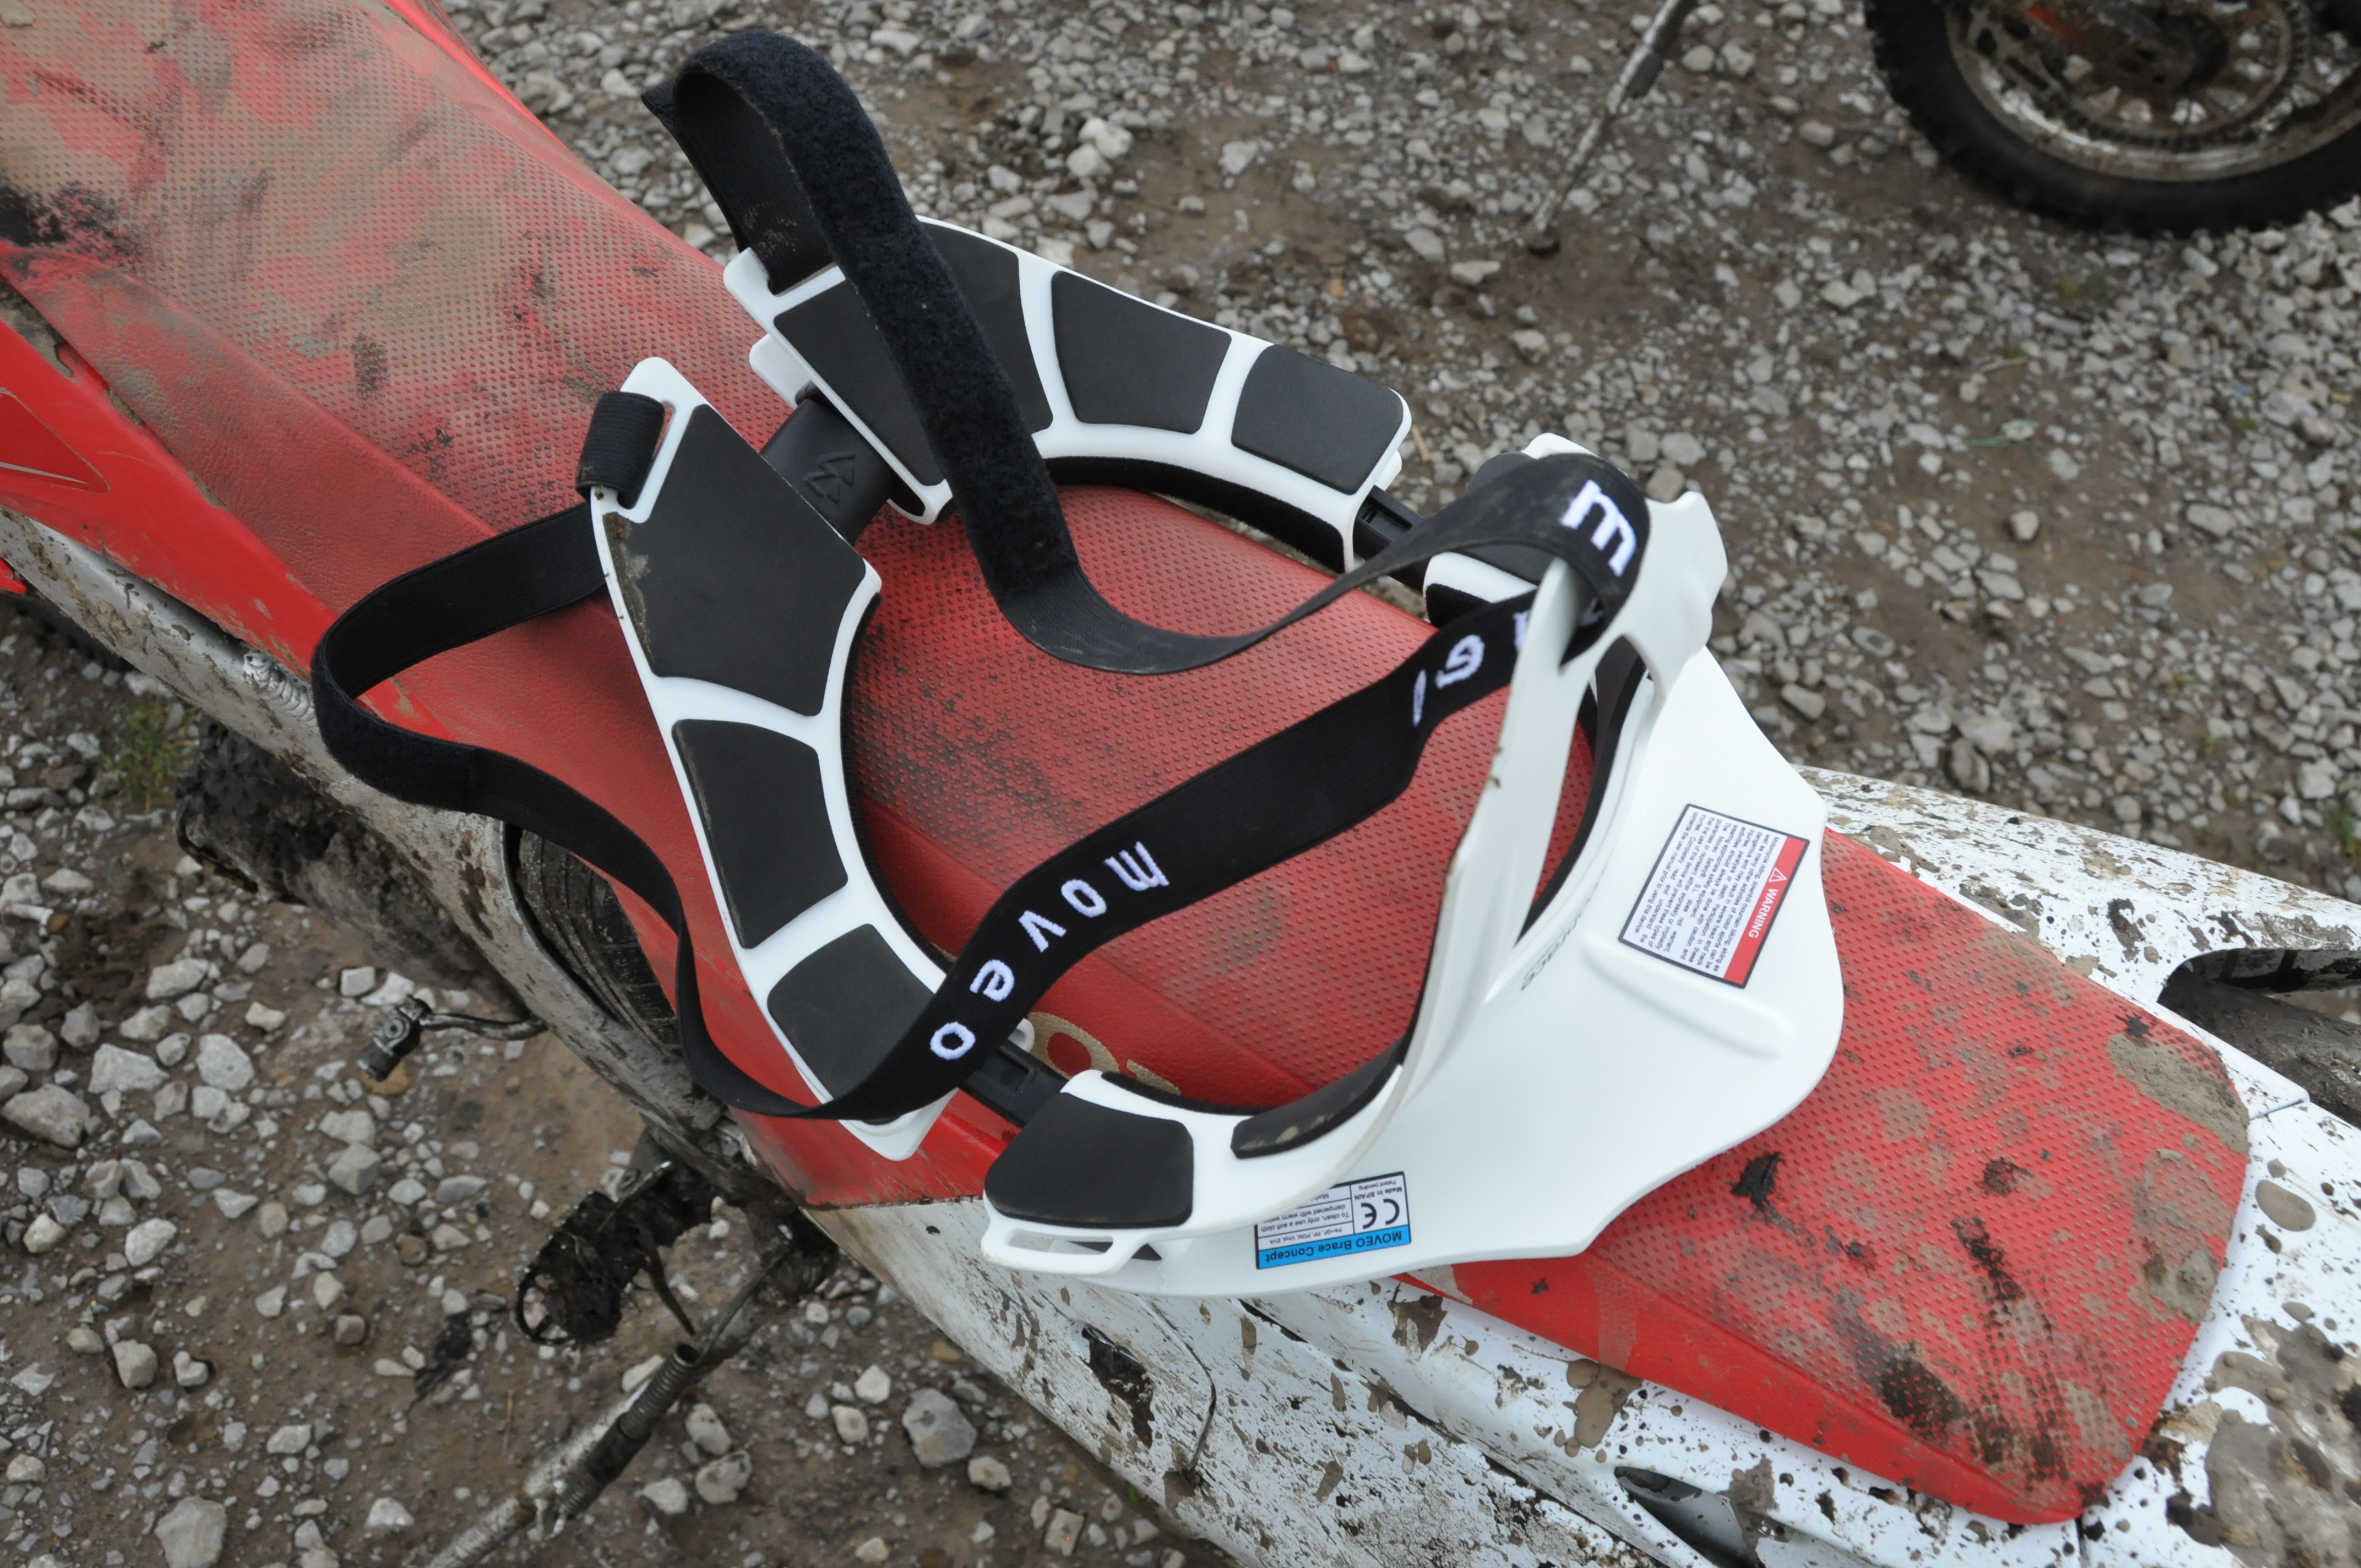 Tested: Moveo Concept Neck Brace